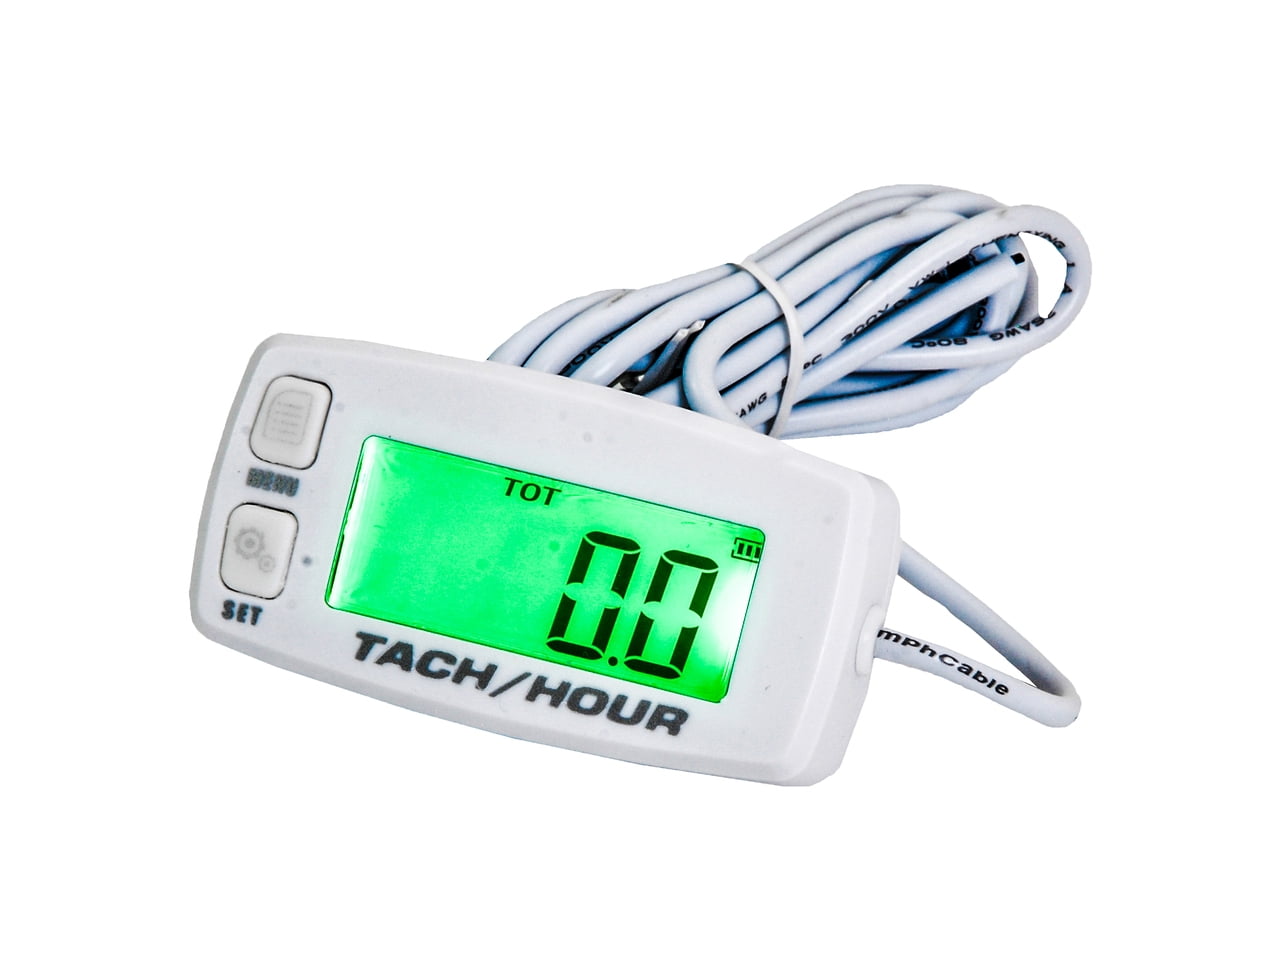 TUFF Tach/Hour Meter for Trucks Cars Motorcycles Scooters ATVS Go-carts Snowmobiles Backlit RPM Gage with Memory Save Universal for All Gas Engines 